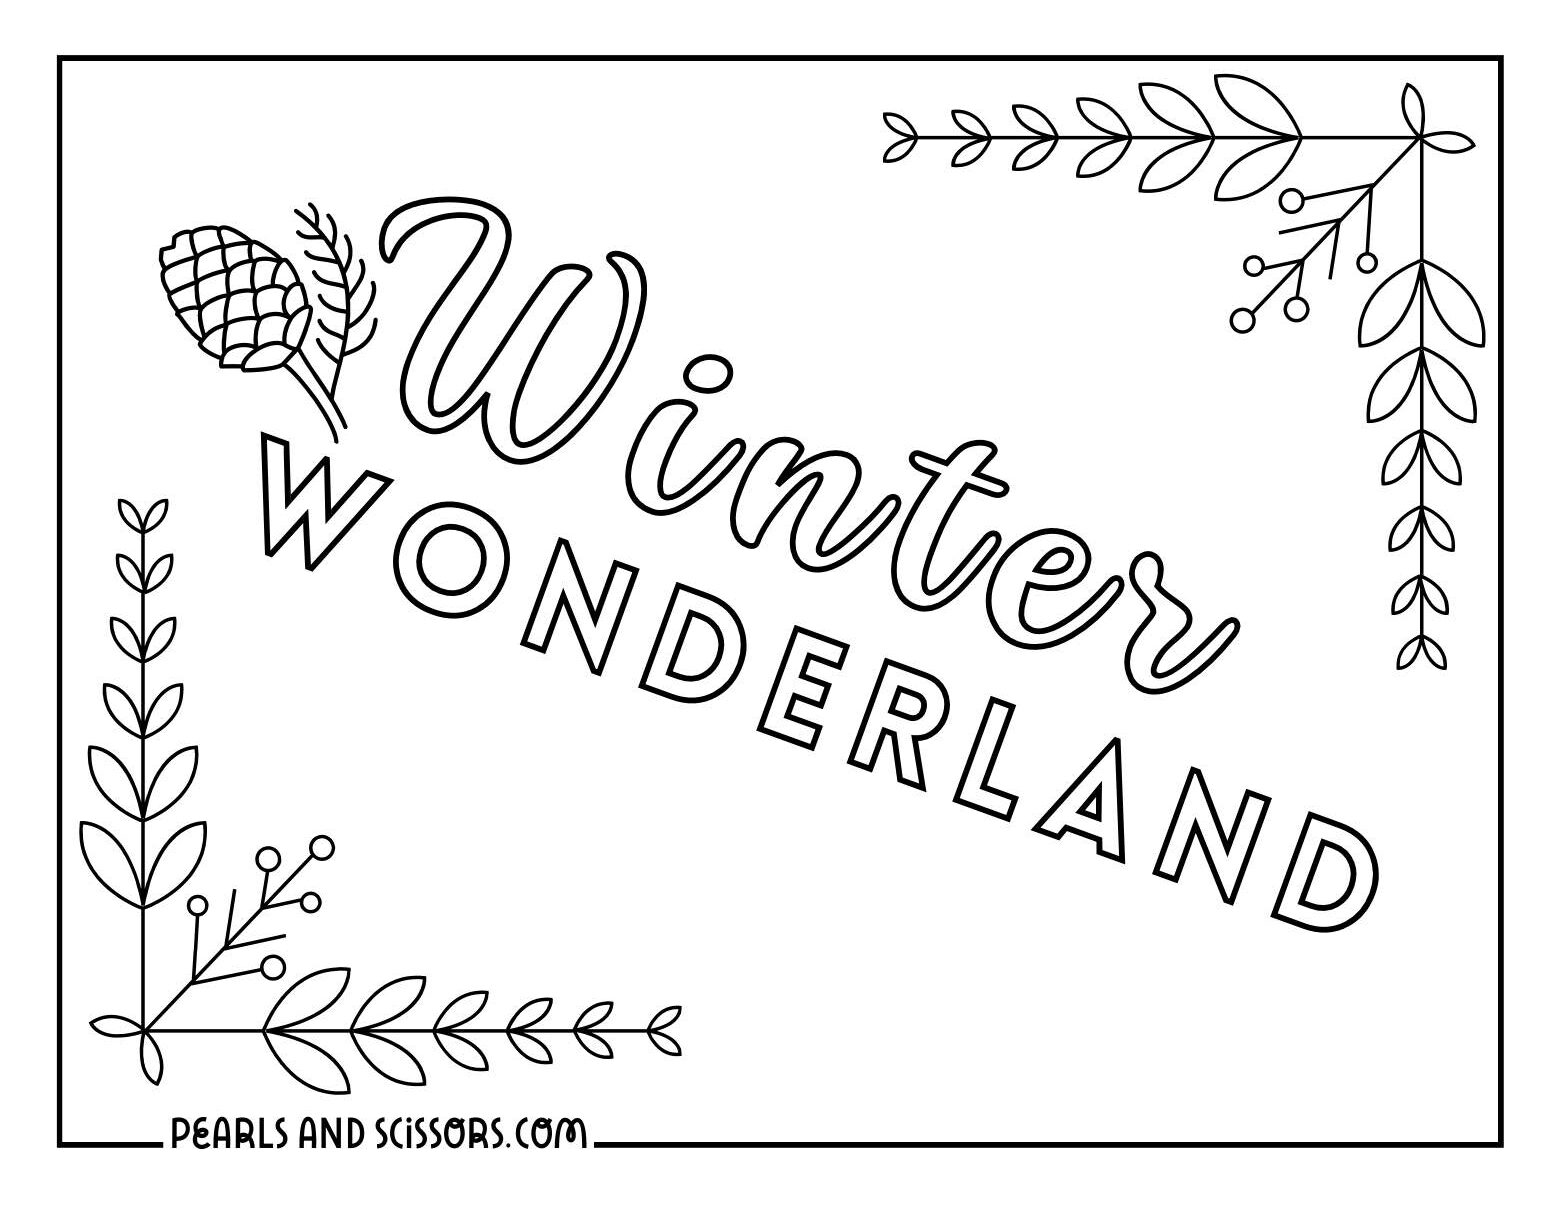 Winter wonderland coloring page for adults.